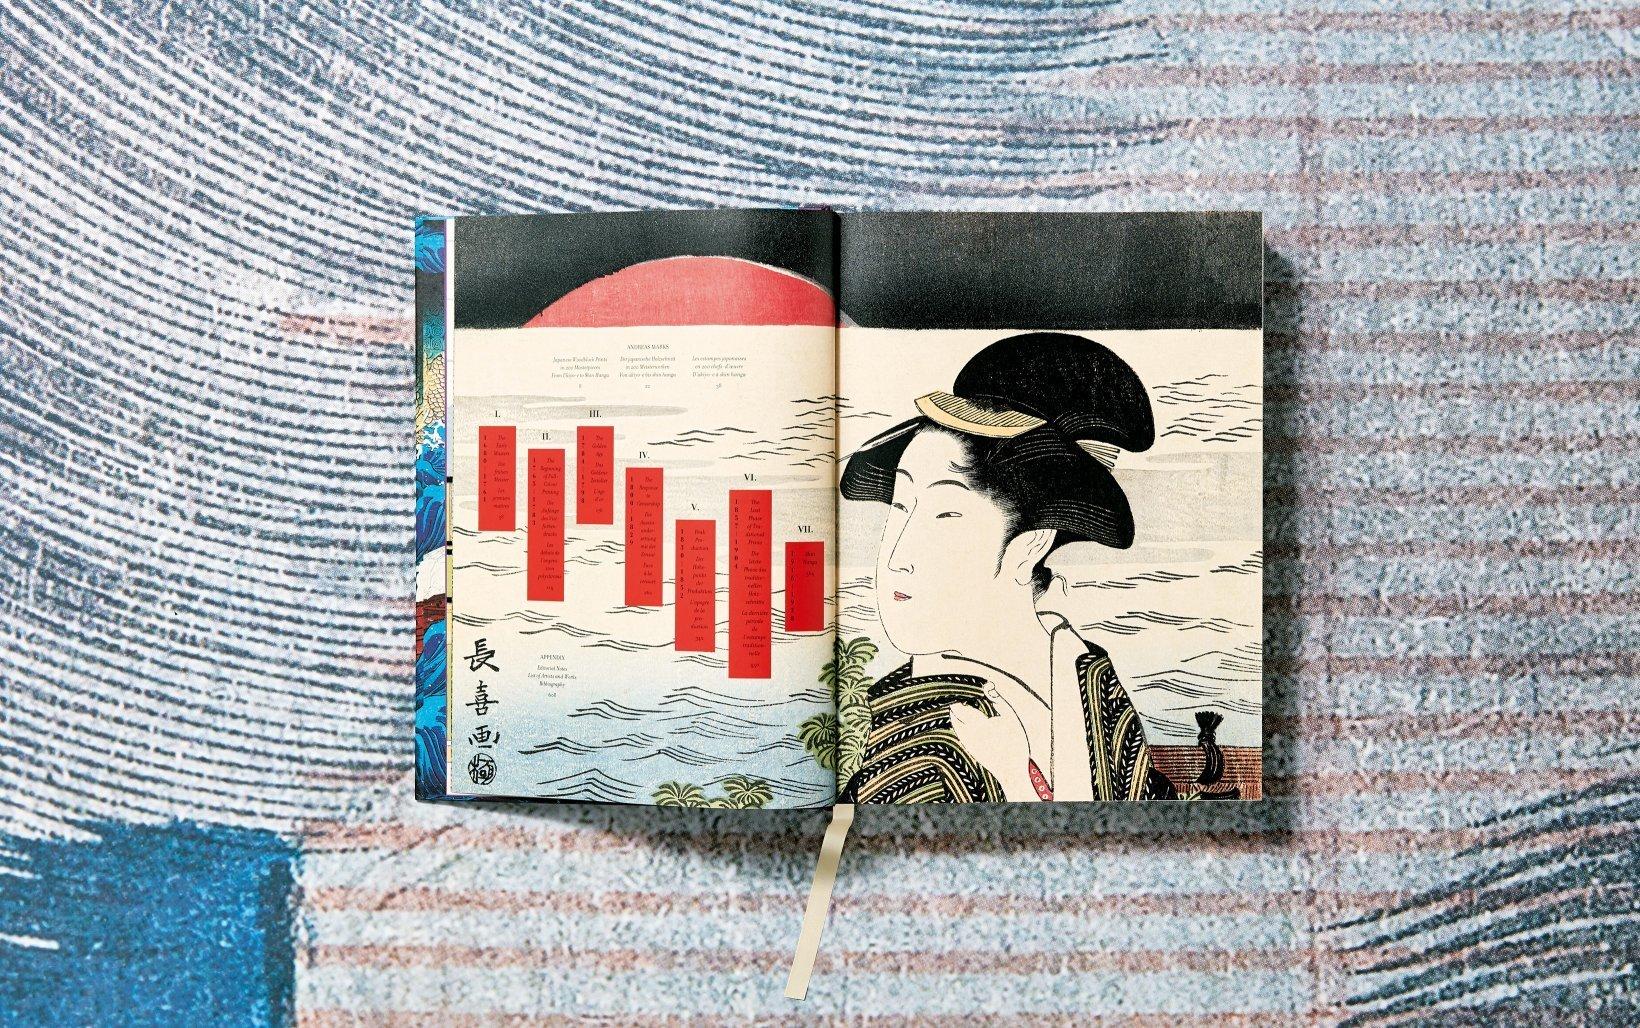 Woodblock Wonders
A visual history of 200 Japanese masterpieces
From Edouard Manet’s portrait of naturalist writer Émile Zola sitting among his Japanese art finds to Van Gogh’s meticulous copies of the Hiroshige prints he devotedly collected,